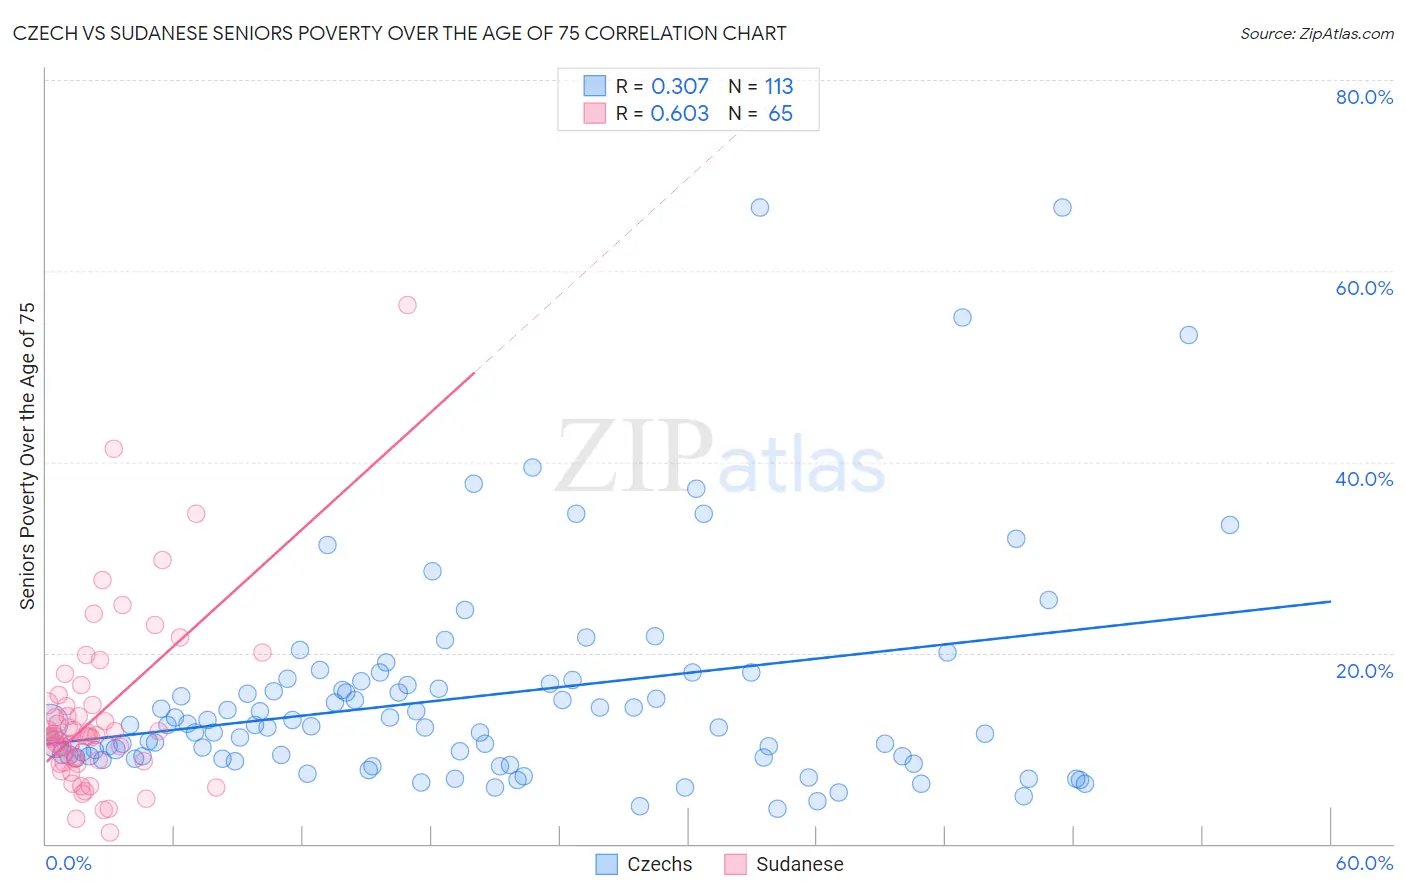 Czech vs Sudanese Seniors Poverty Over the Age of 75